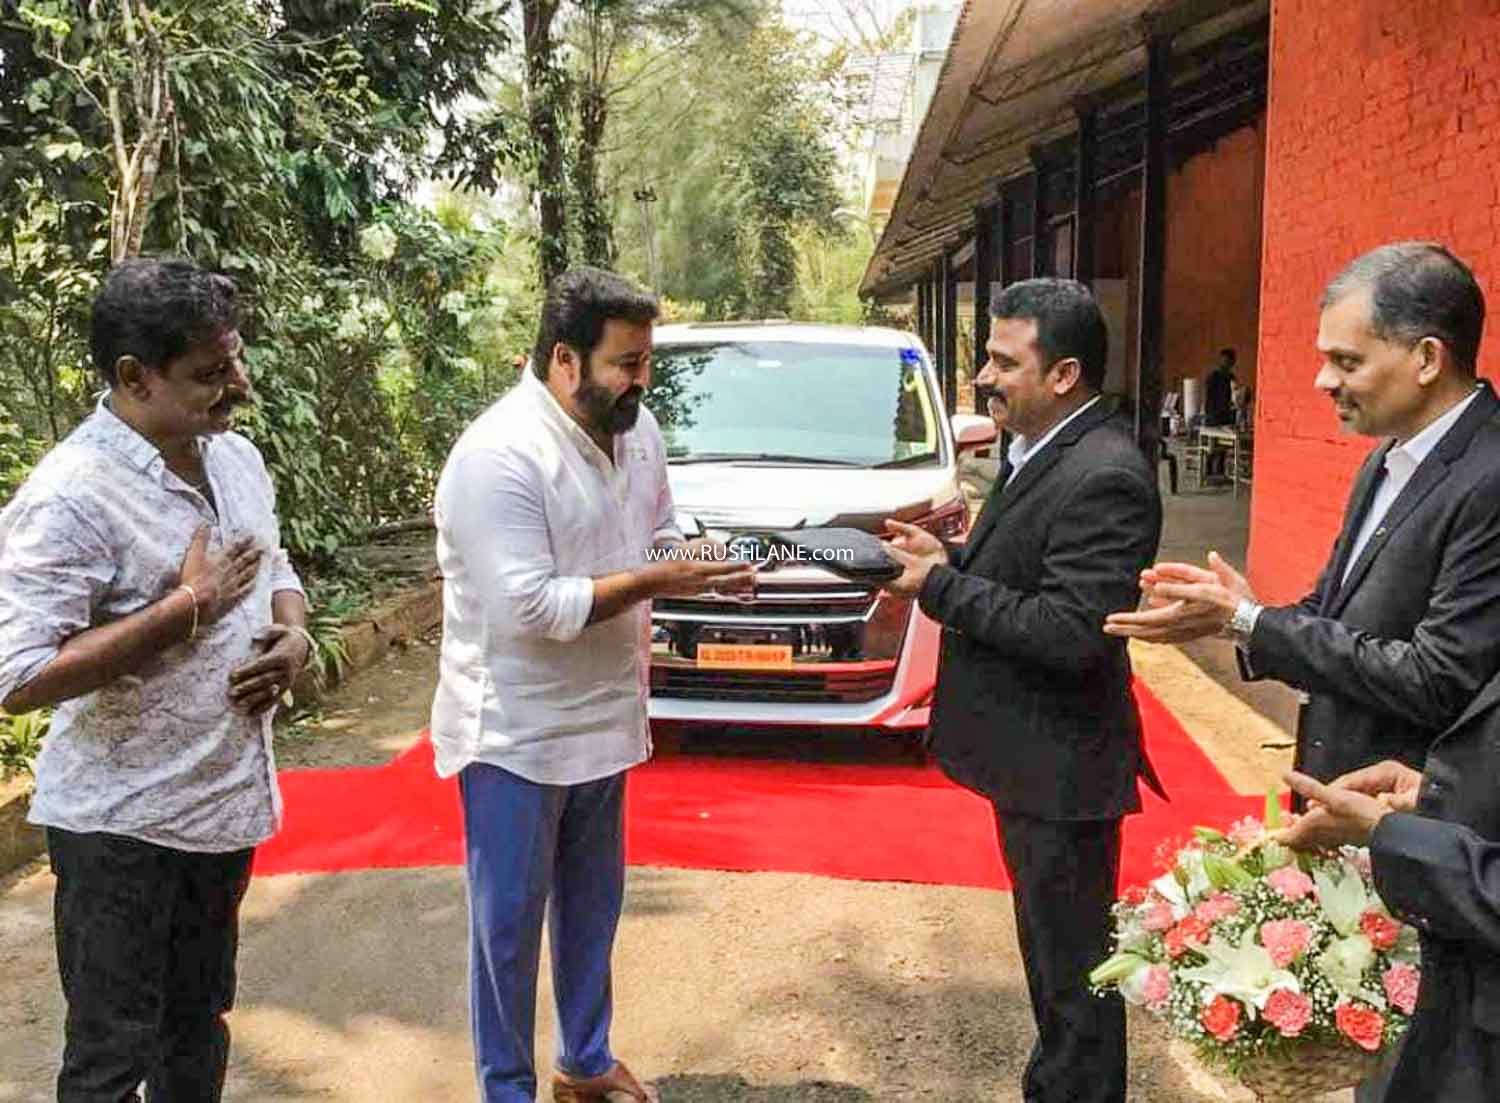 Toyota Vellfire delivered to Mohanlal